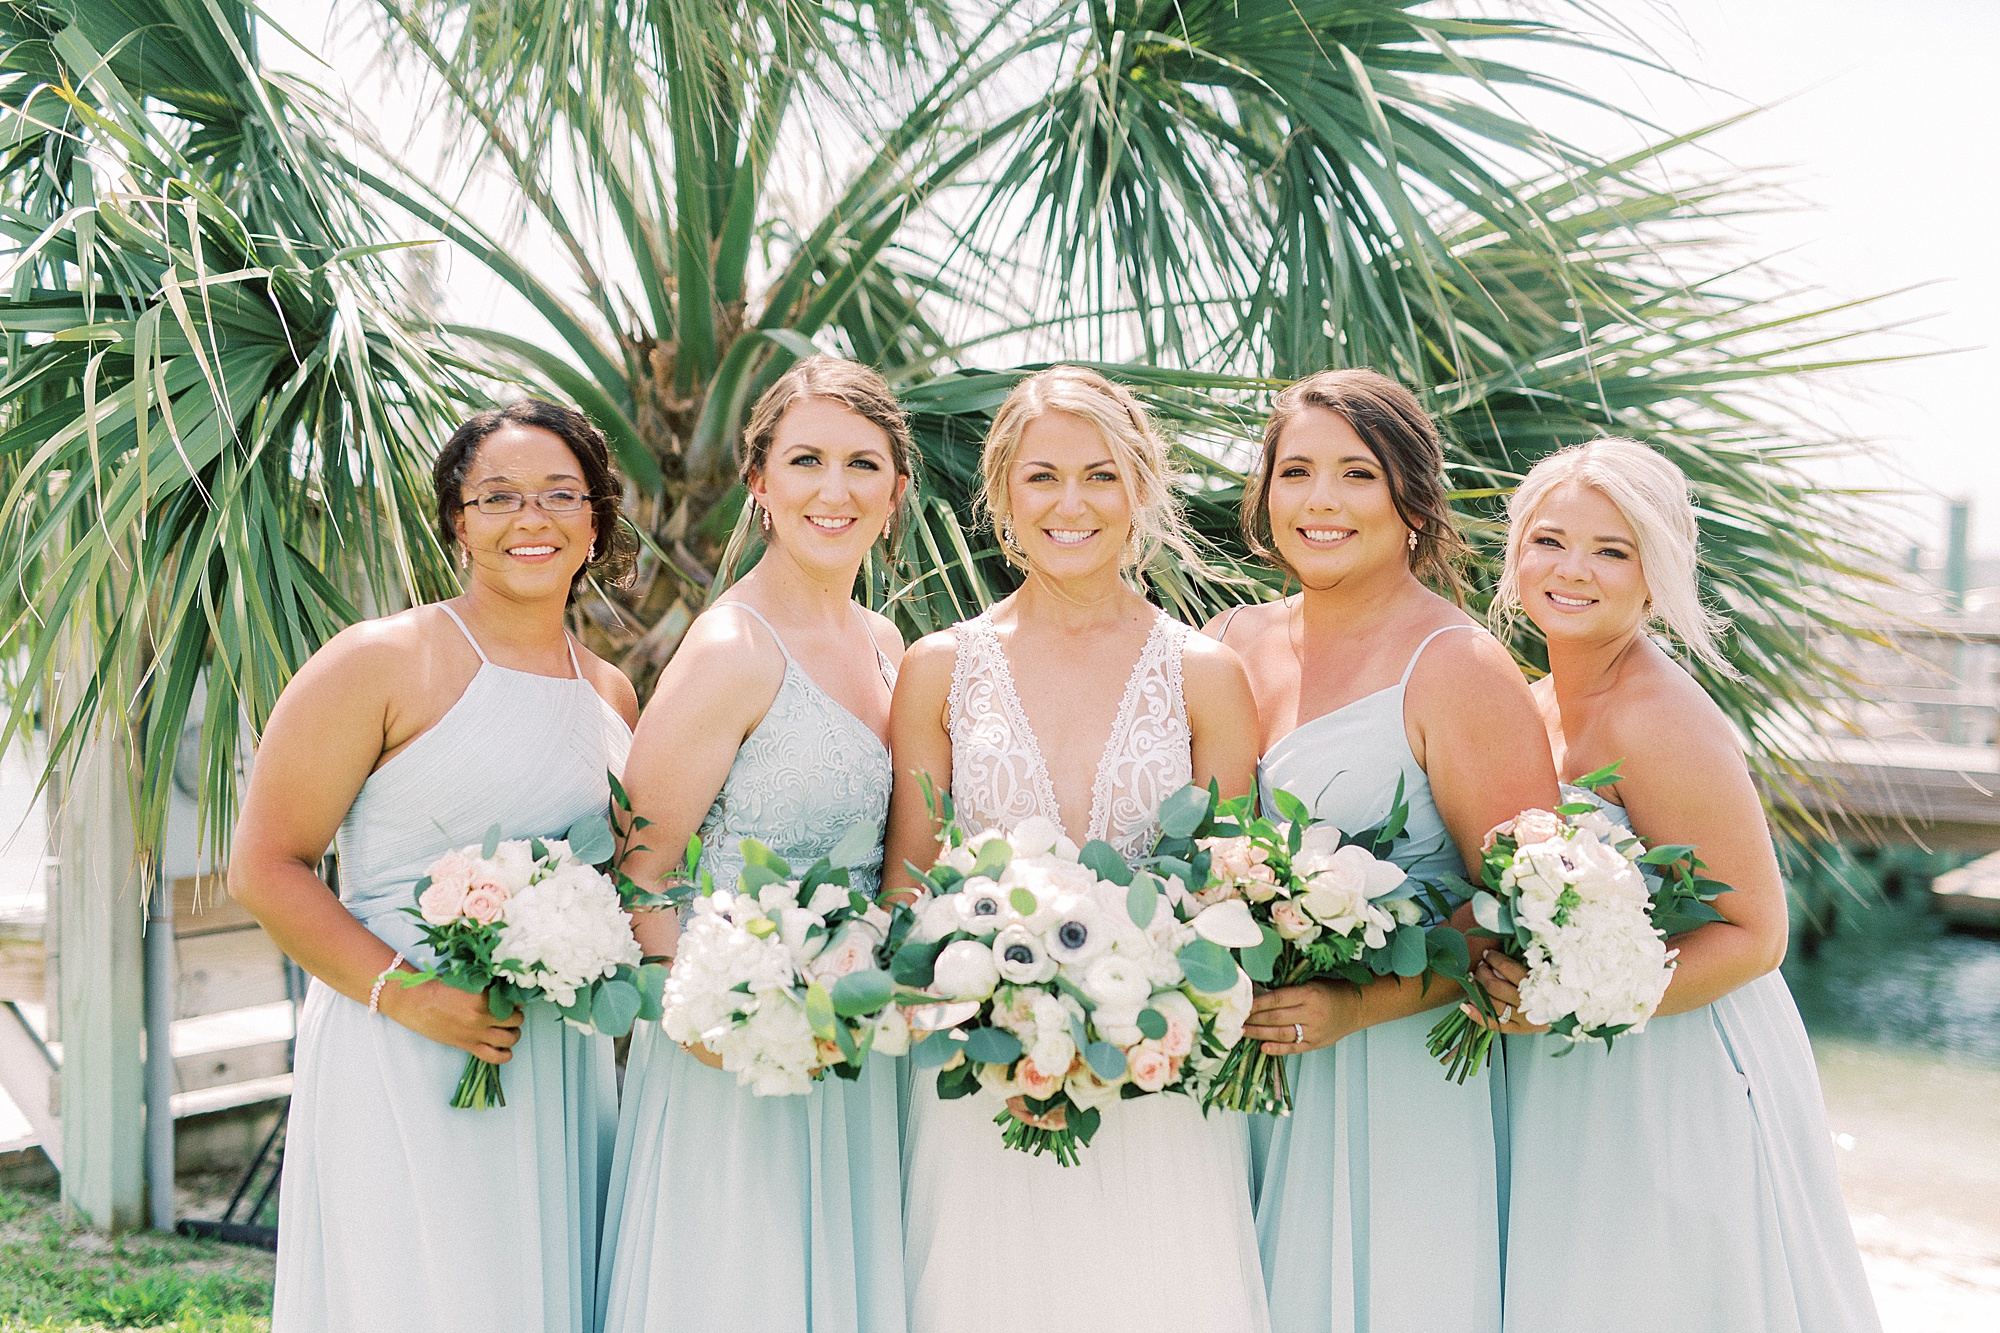 bride smiles with bridesmaids in light blue dresses